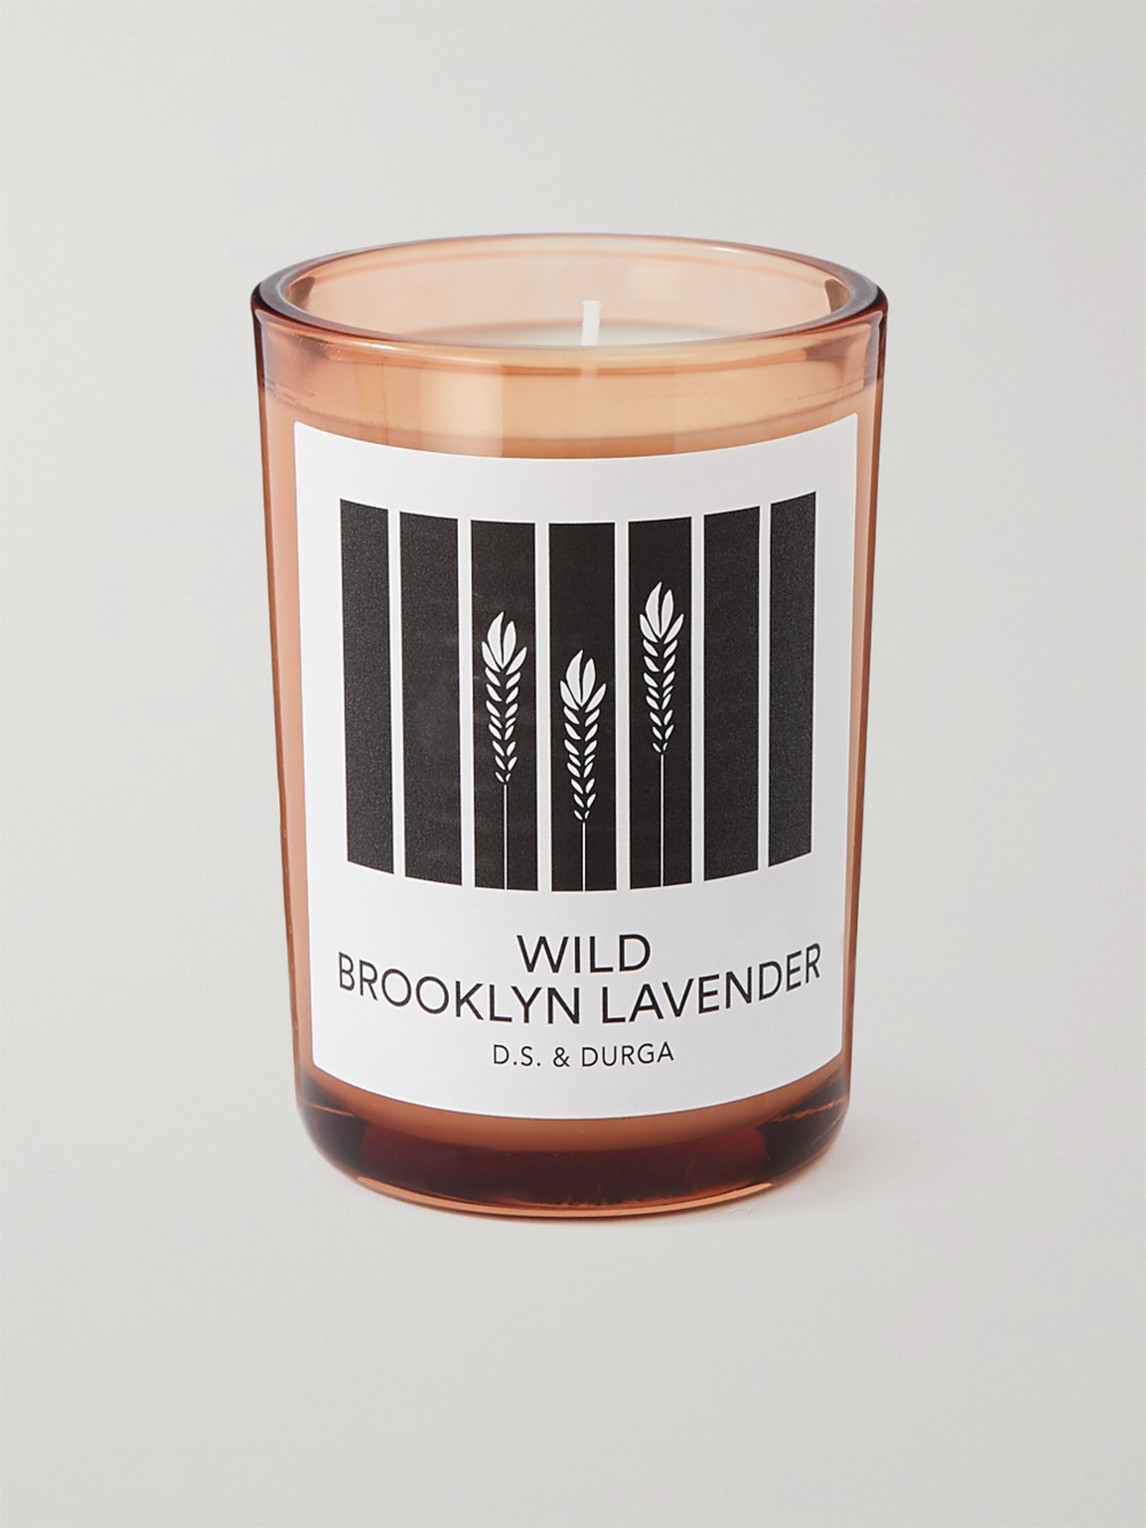 D.s. & Durga Wild Brooklyn Lavender Scented Candle, 200g In Colorless